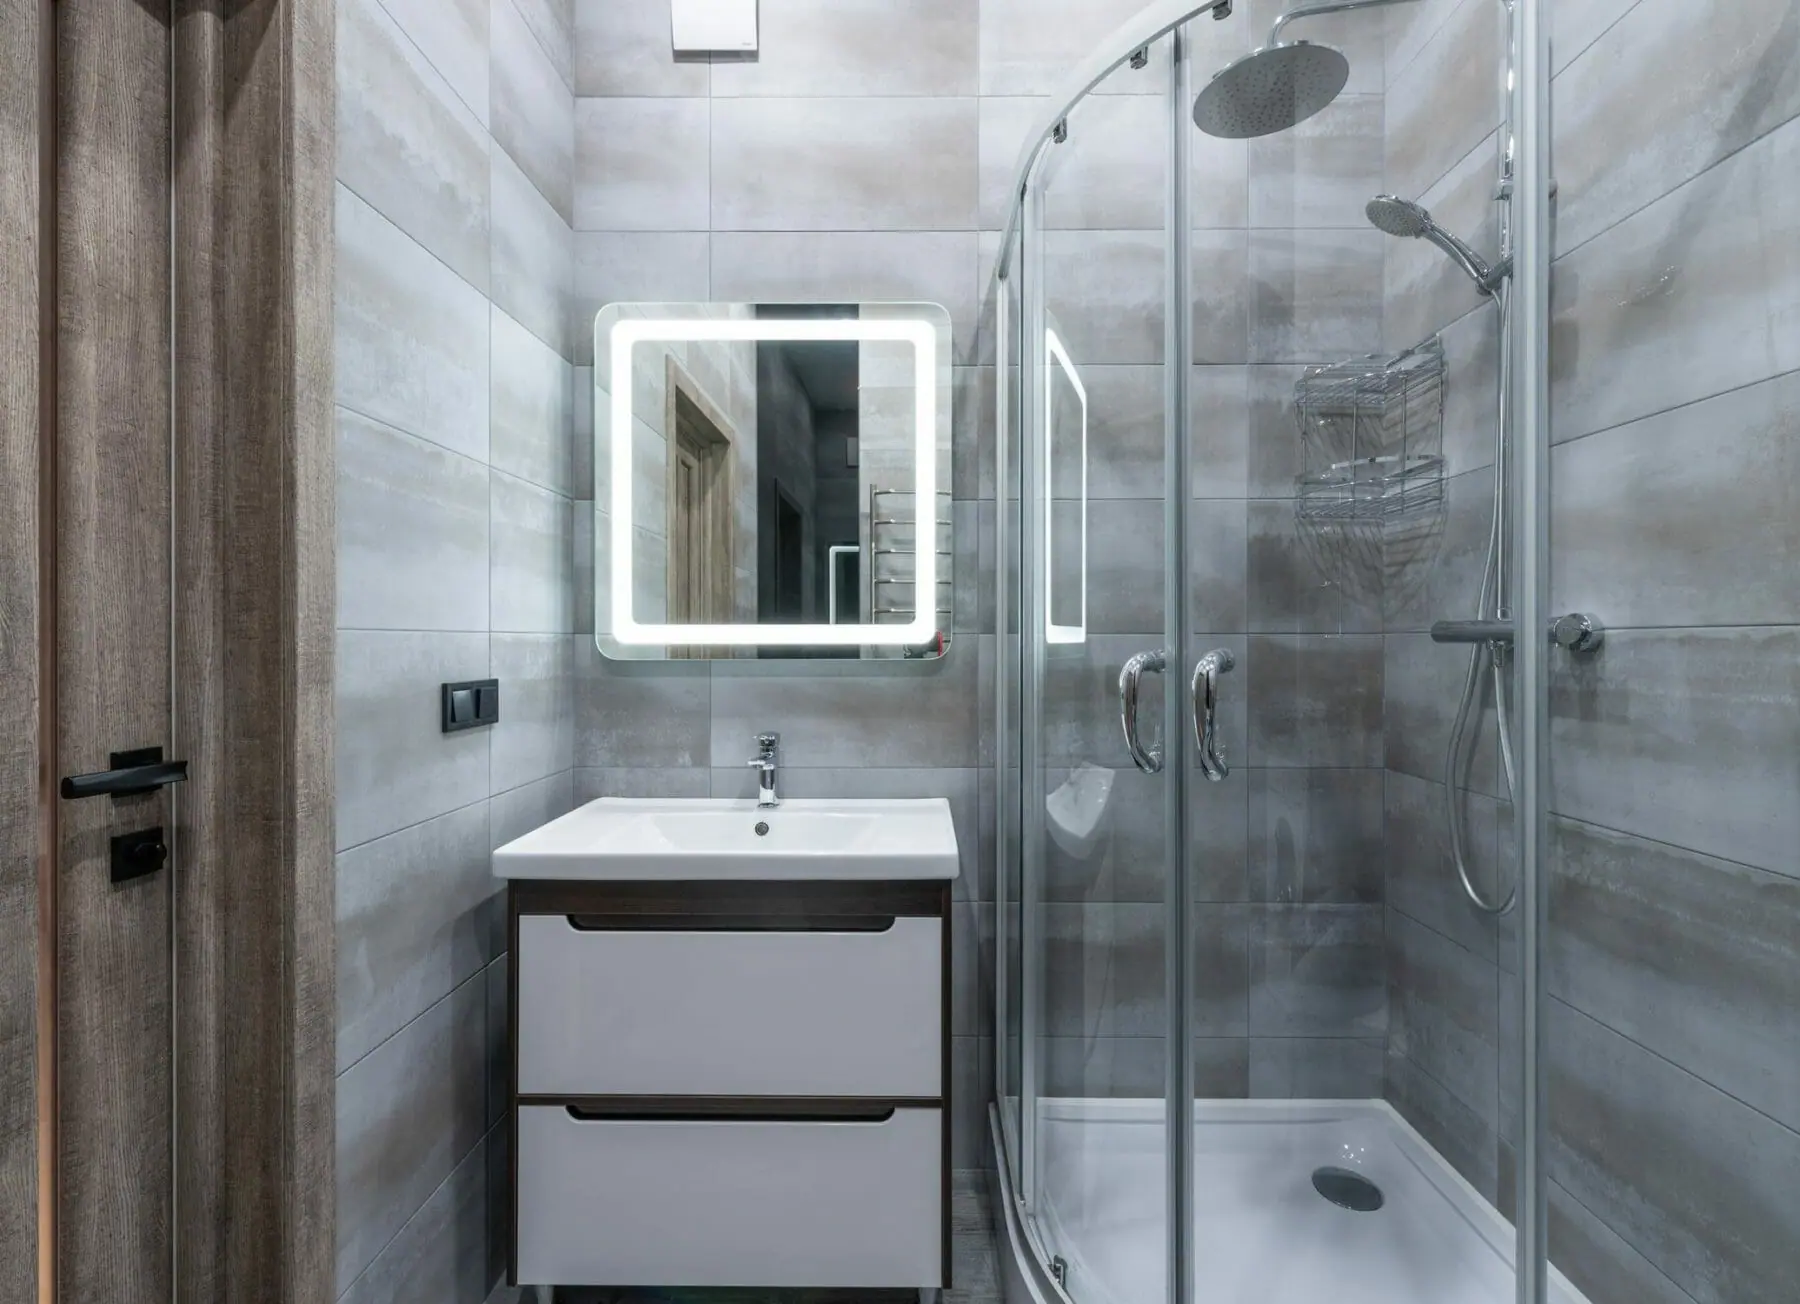 How to Prevent Water Spots on Shower Doors! {2 Clever Tips}